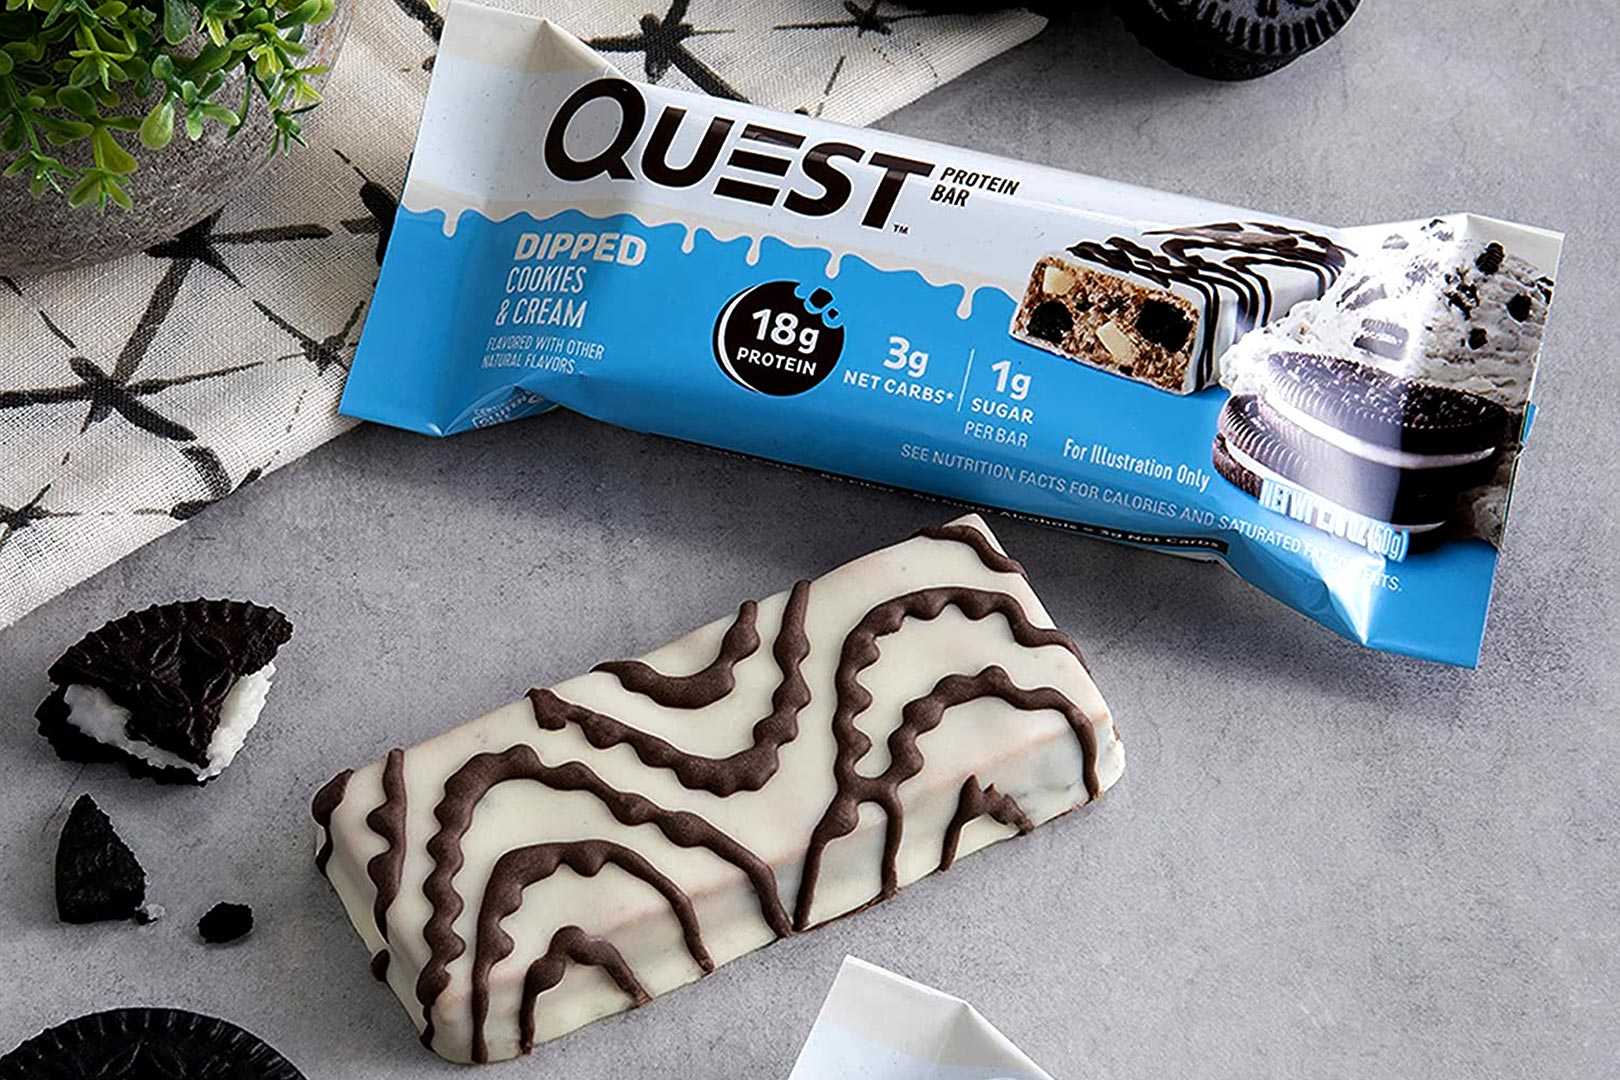 Dipped Cookies And Cream Quest Protein Bar